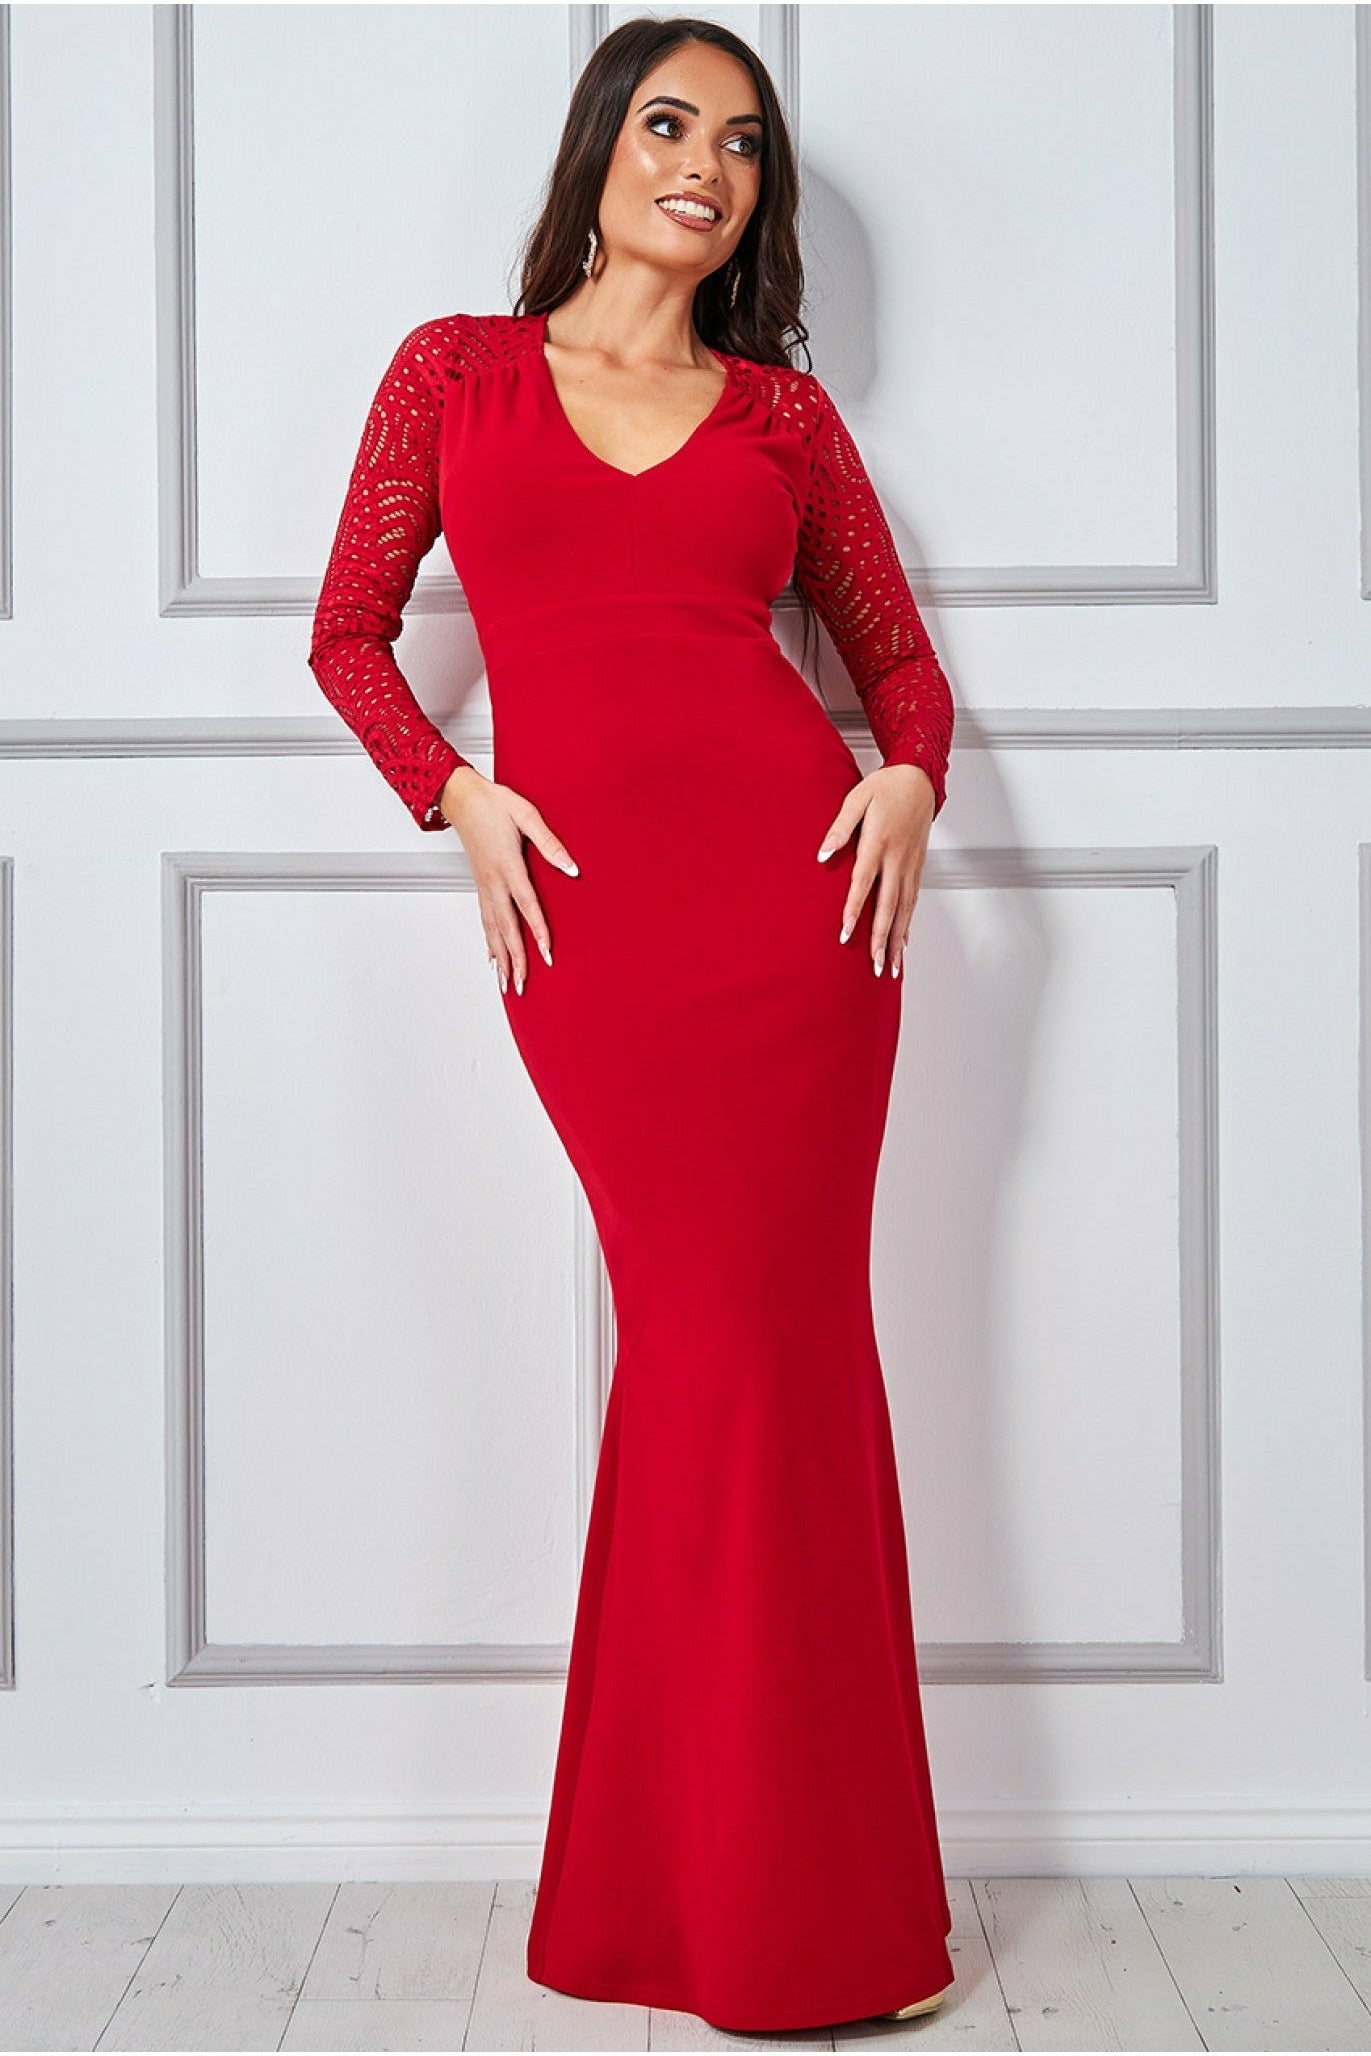 Lace Back Full Sleeve Maxi Dress - Red DR2870